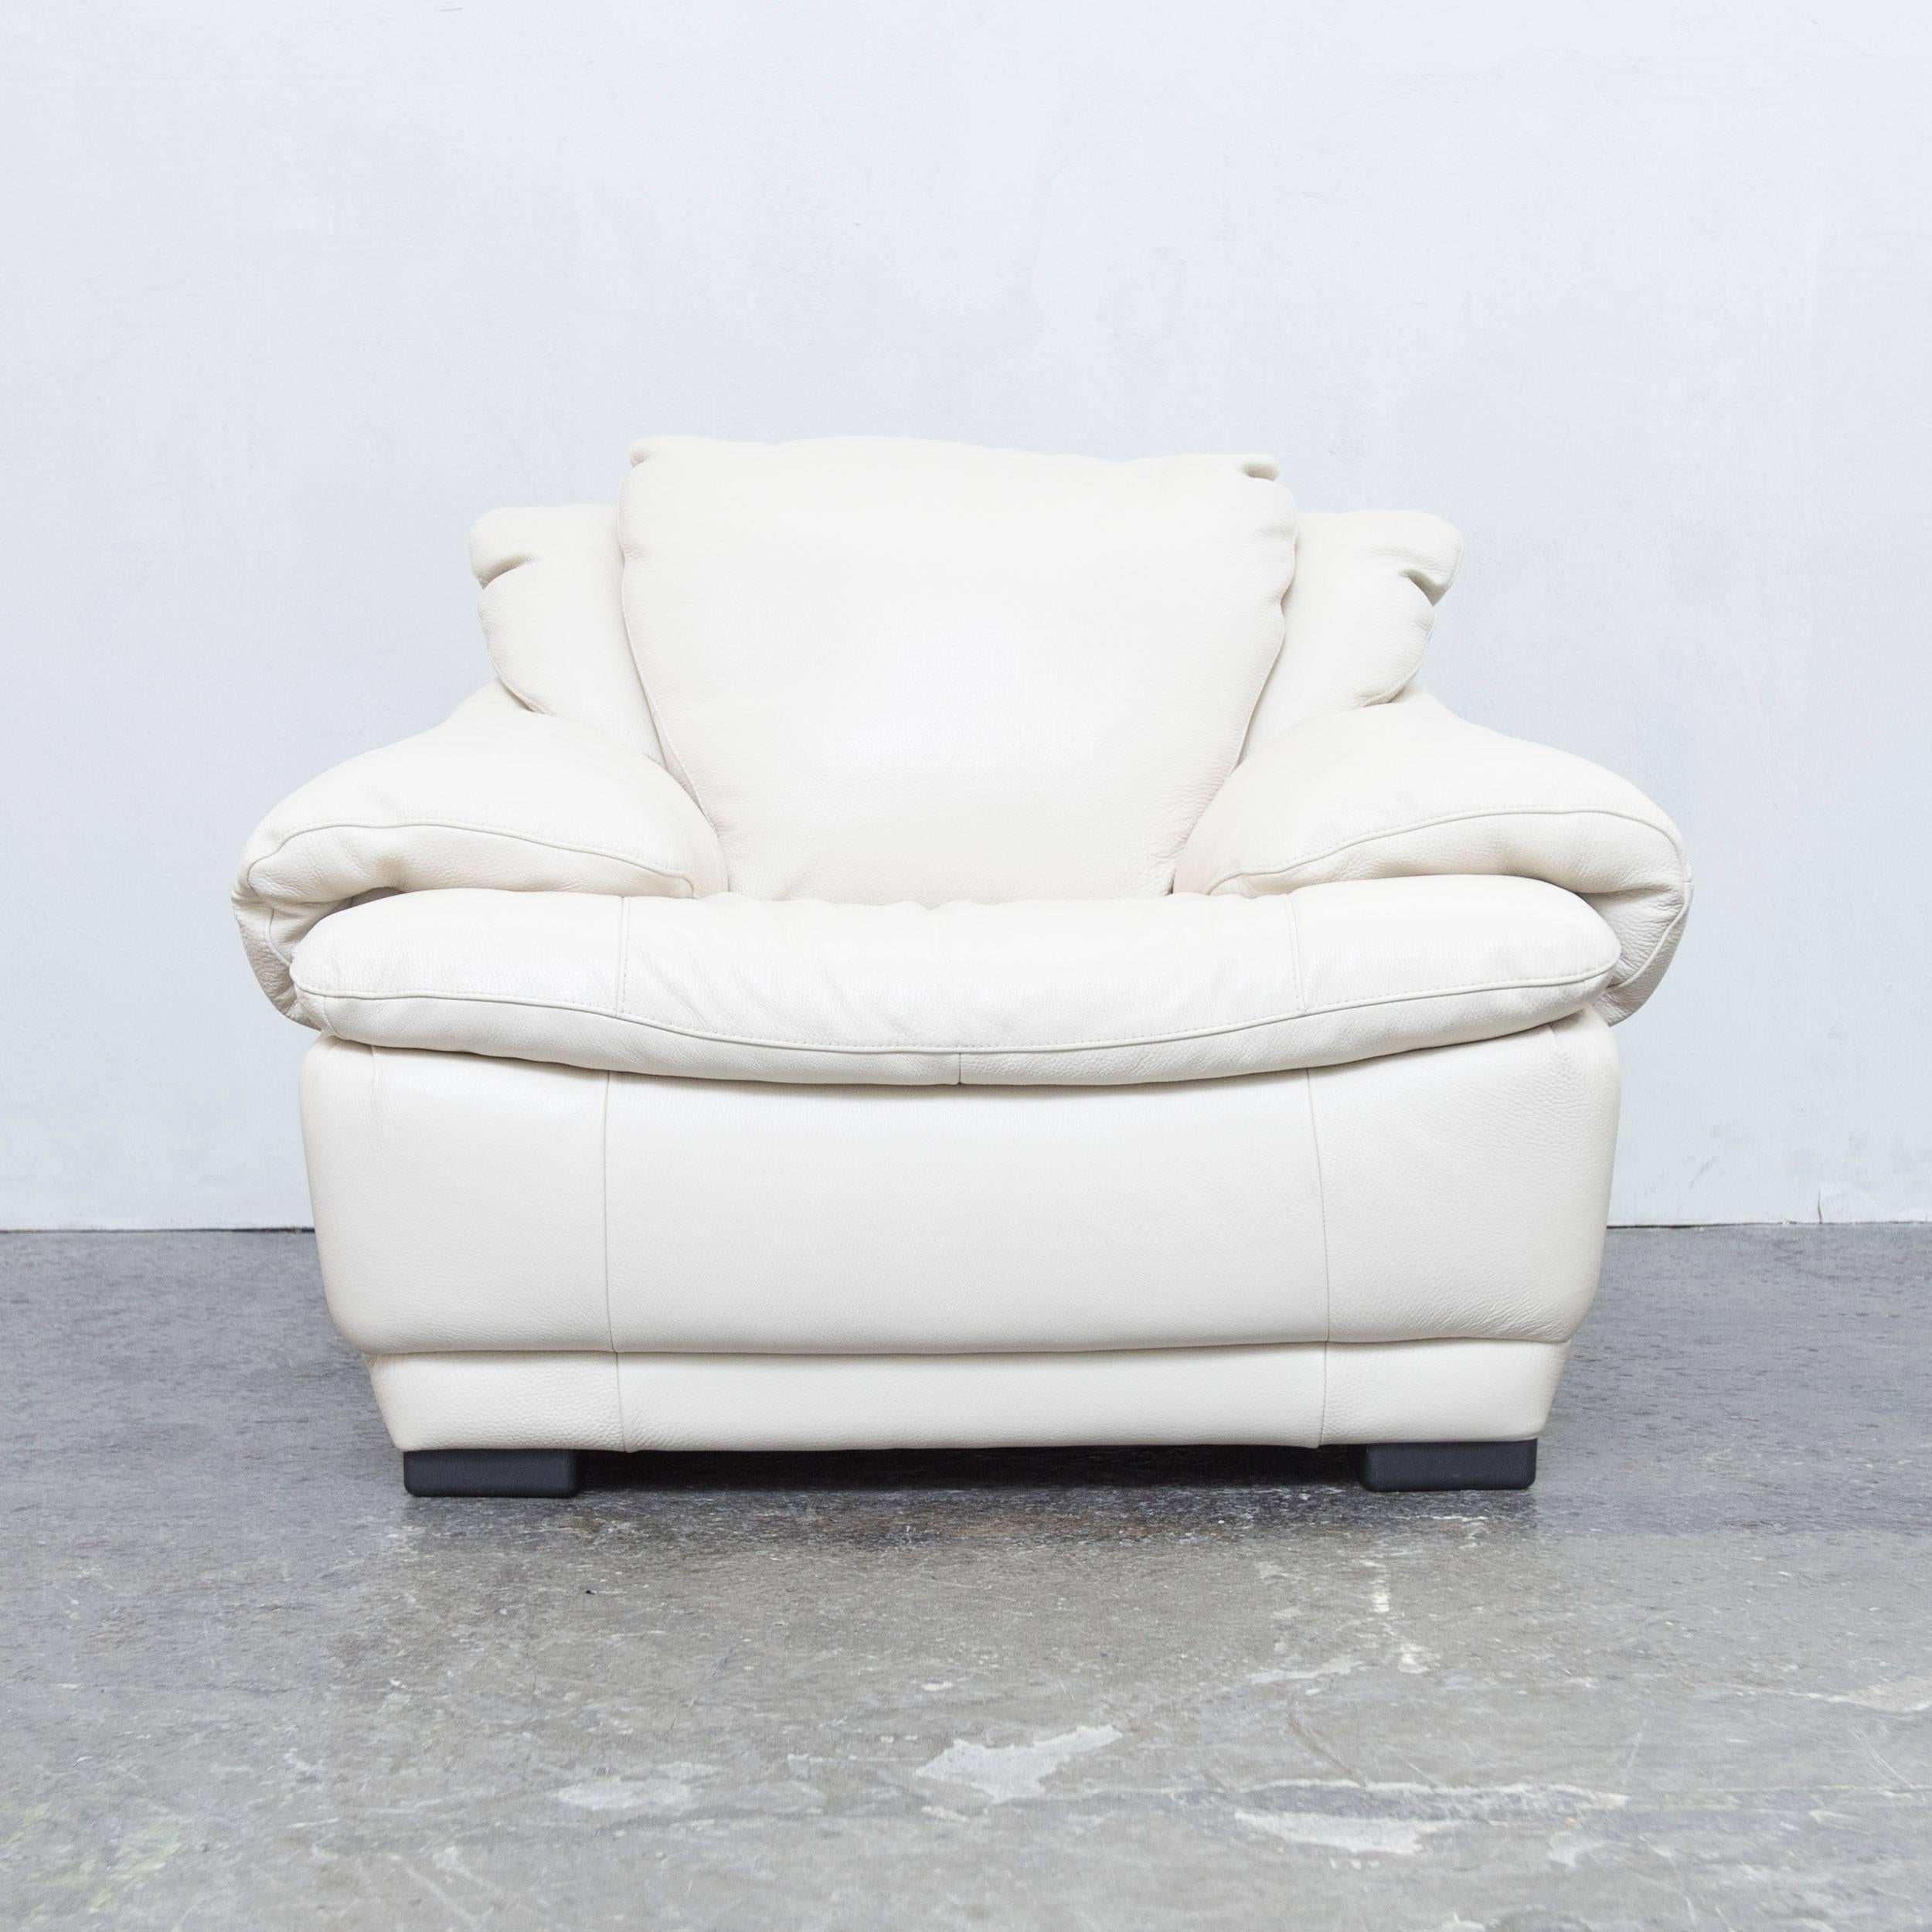 Creme white colored original Italsofa by Natuzzi designer leather chair in a minimalistic and modern design, made for pure comfort.